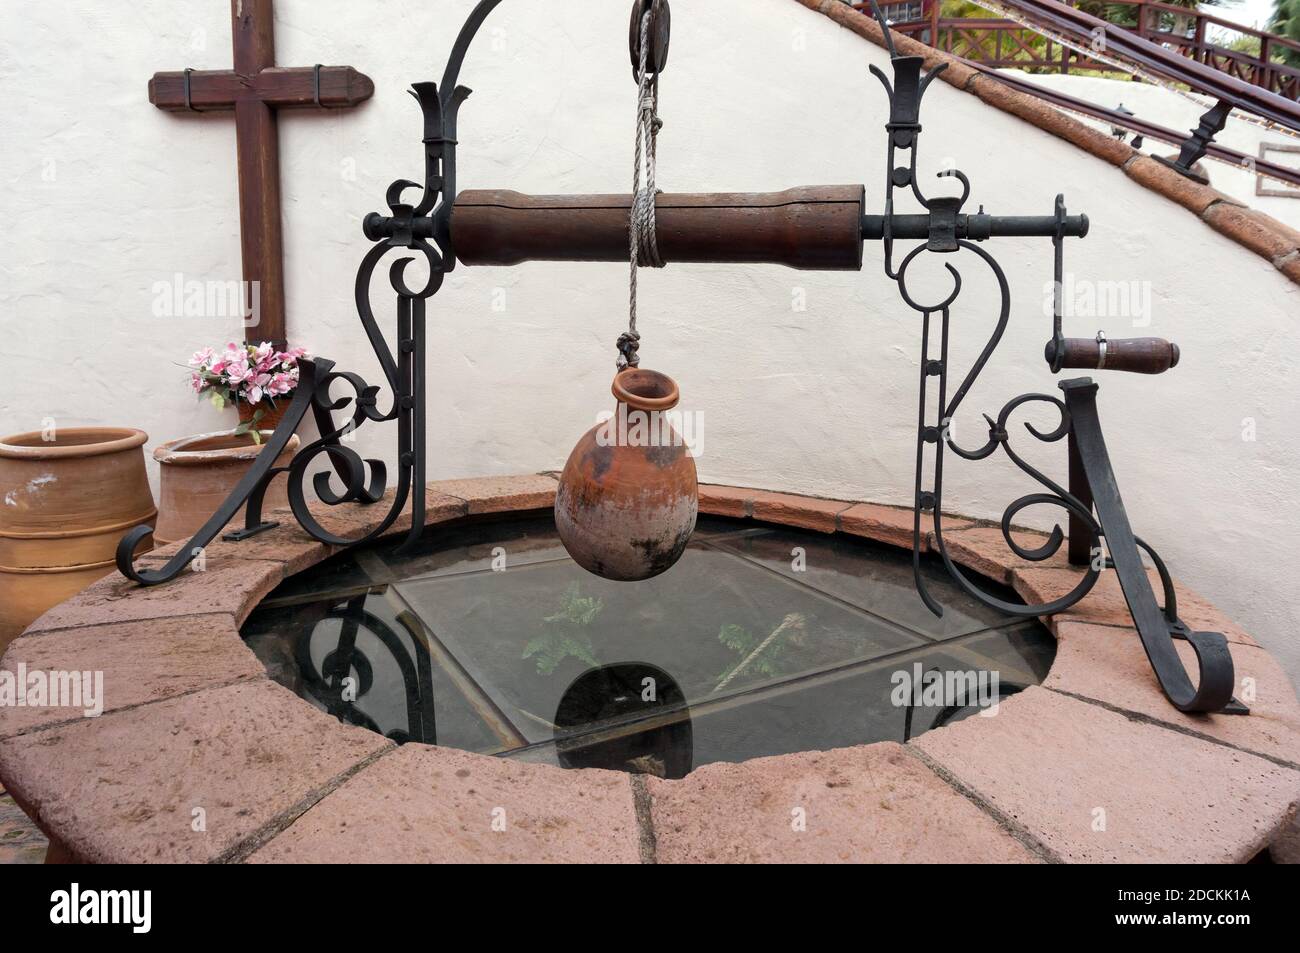 Ancient Spanish well with a hopper and a clay jug on a winch. Stock Photo